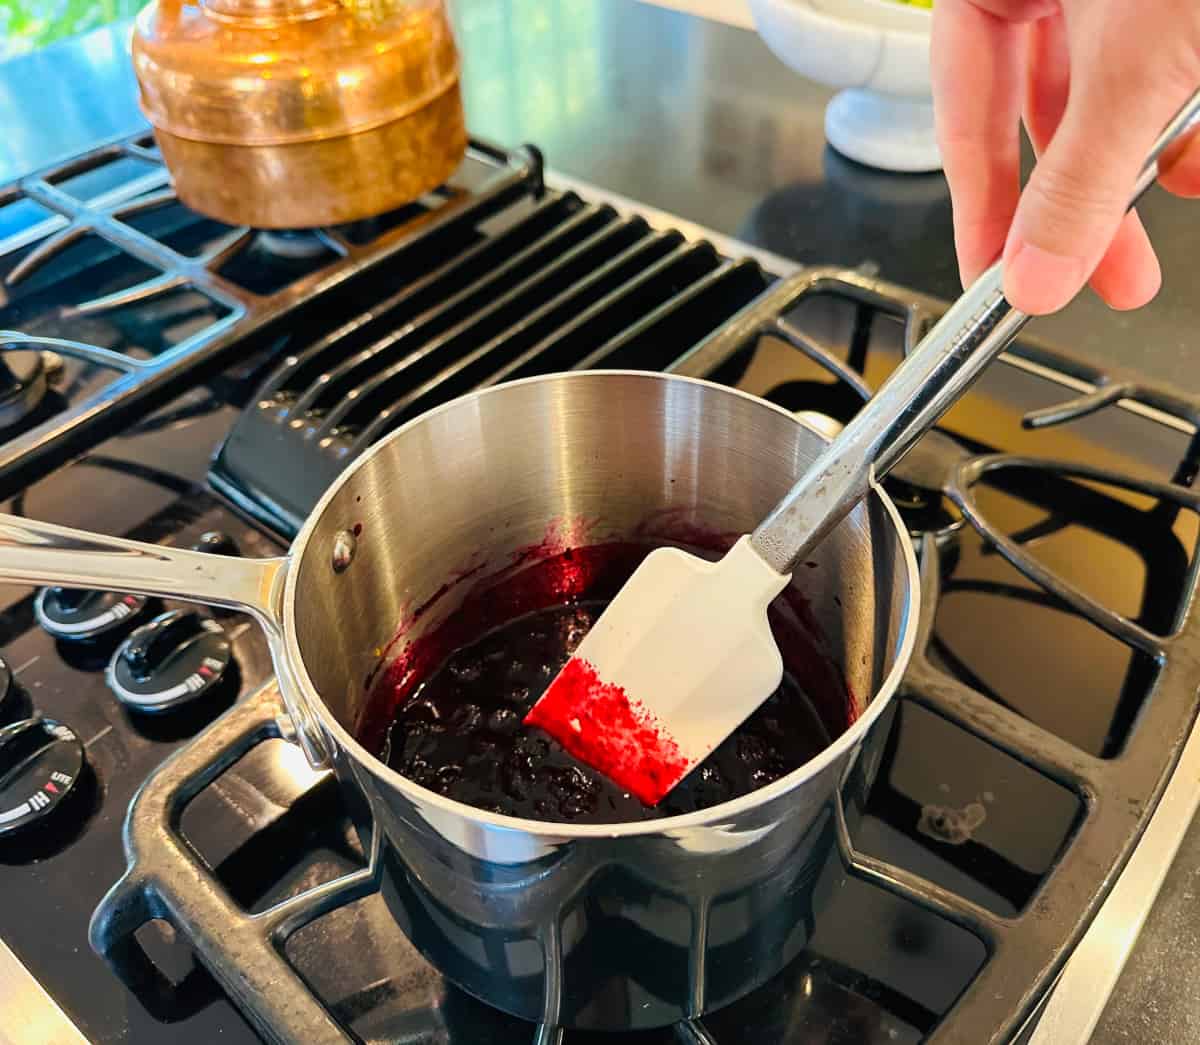 Blueberry compote being stirred with a white silicone spatula while cooling in a small steel saucepan.